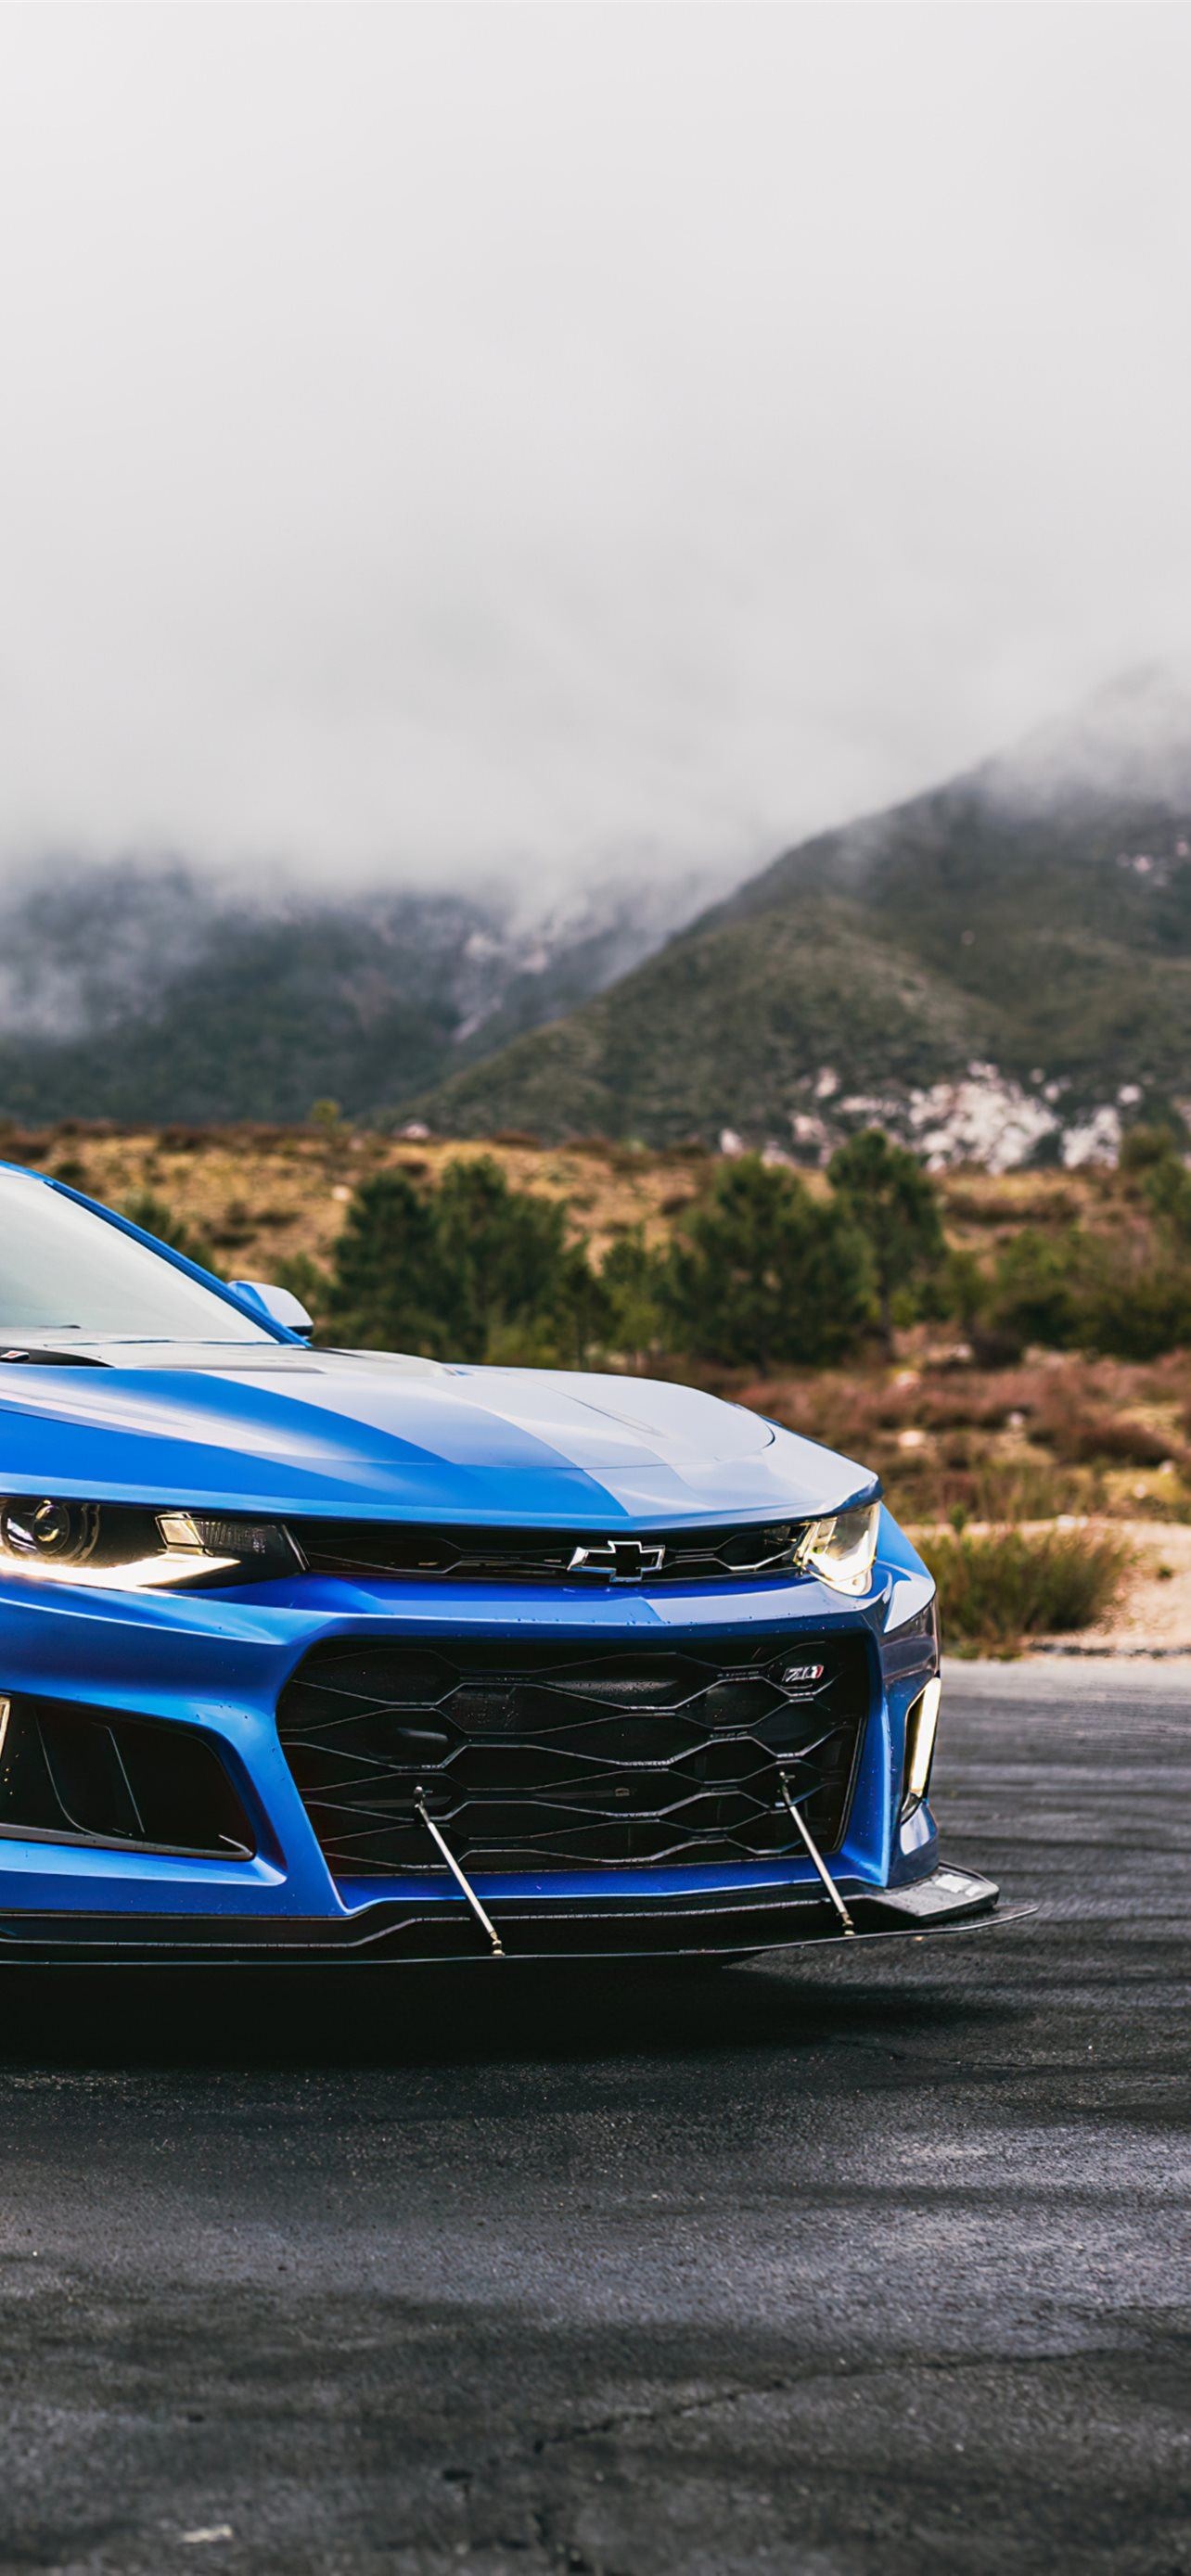 Chevrolet Camaro ZL1 iPhone wallpapers, Mobile customization, Personalize your screen, High-powered beauty, Free download, 1290x2780 HD Phone